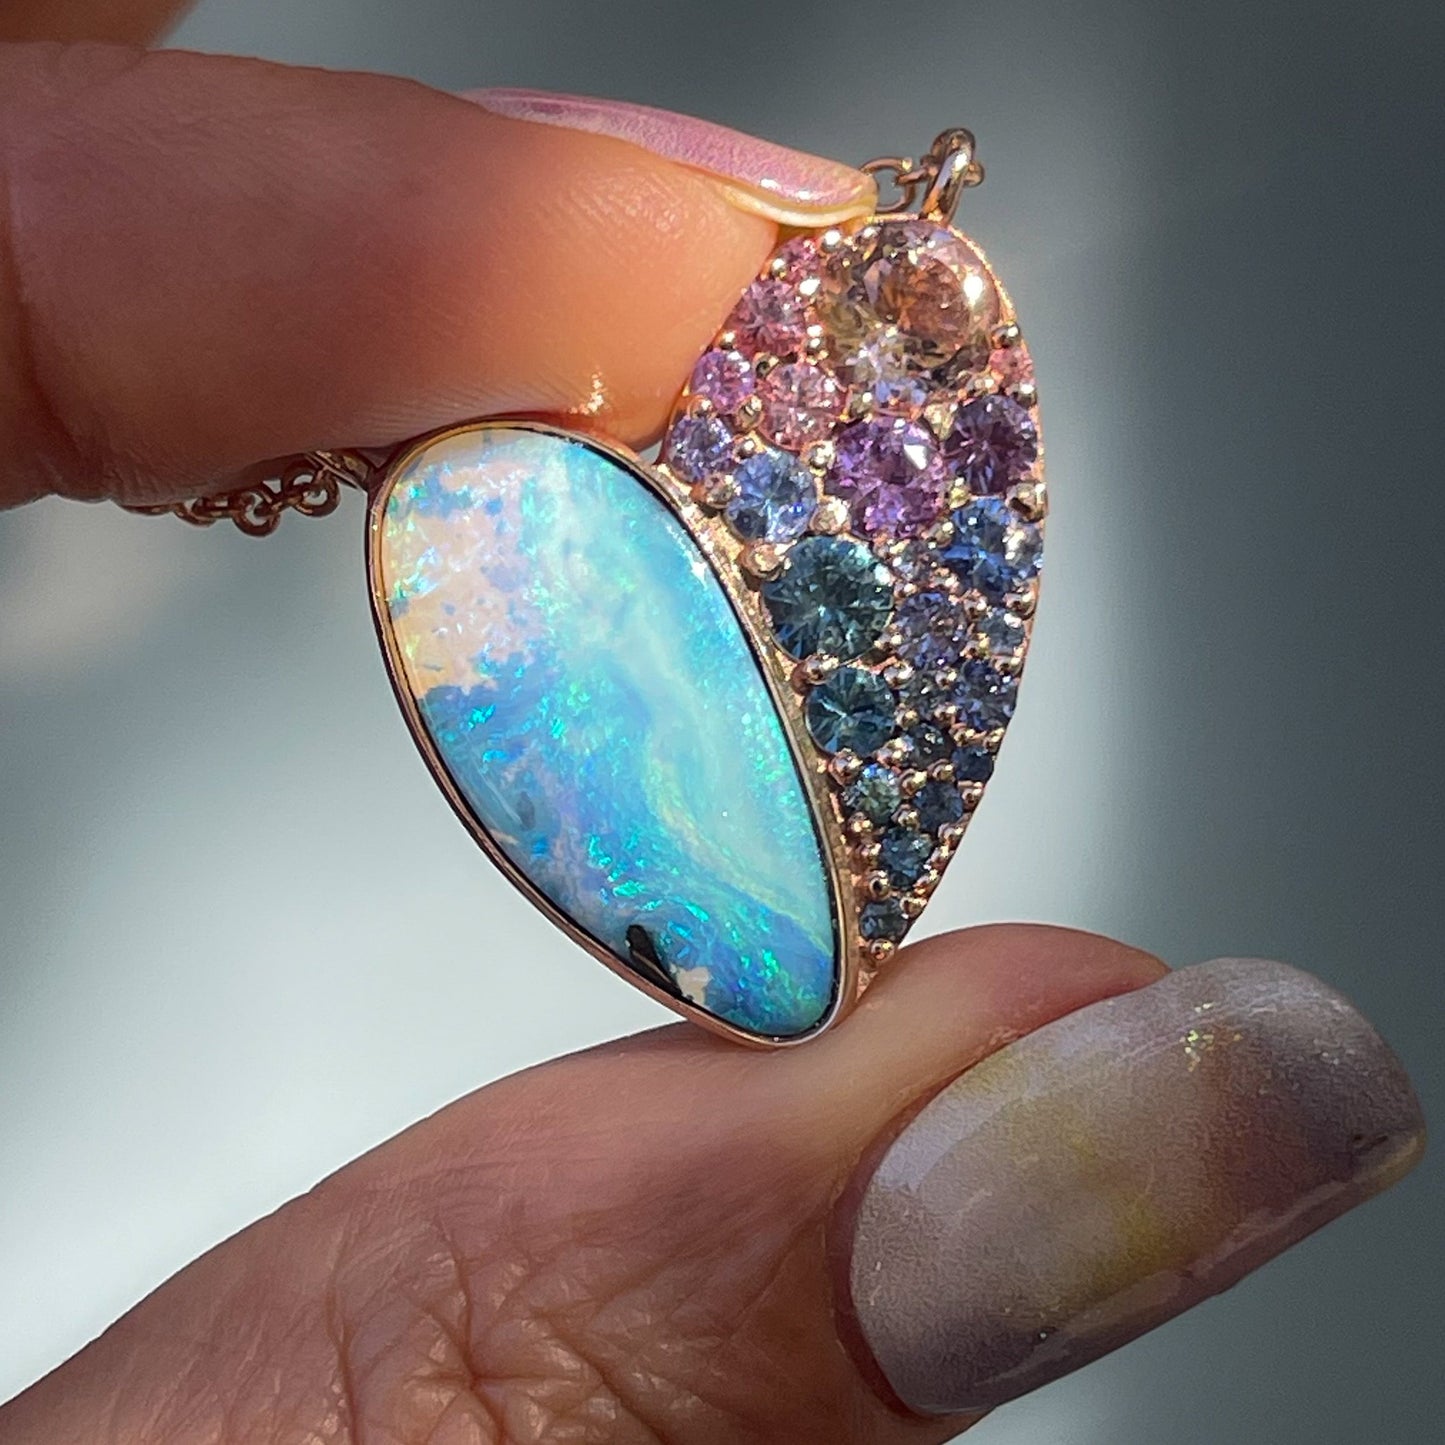 A Heart Opal Necklace by NIXIN Jewelry with a boulder opal and pave gemstones.